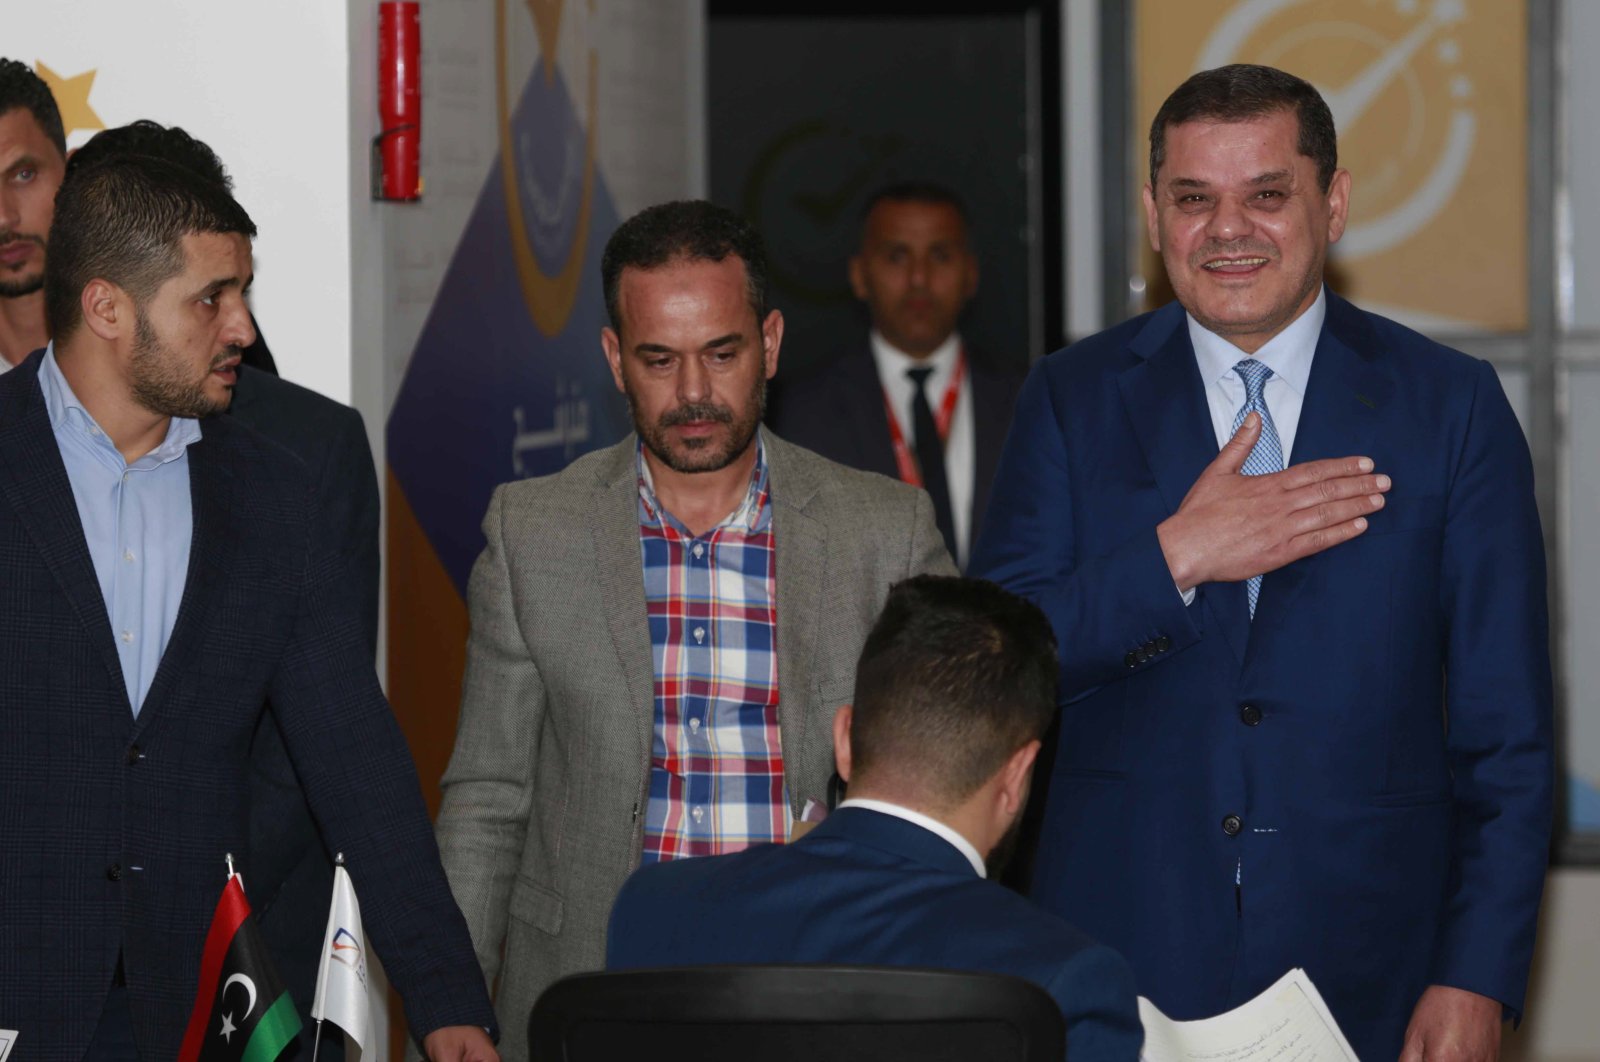 Prime Minister of the Government of National Unity in Libya Abdel-Hamid Mohammed Dbeibah submits his candidacy papers for the presidency of the country to the headquarters of the High National Elections Commission in the capital, Tripoli, Libya, Nov. 21, 2021. (AP Photo)